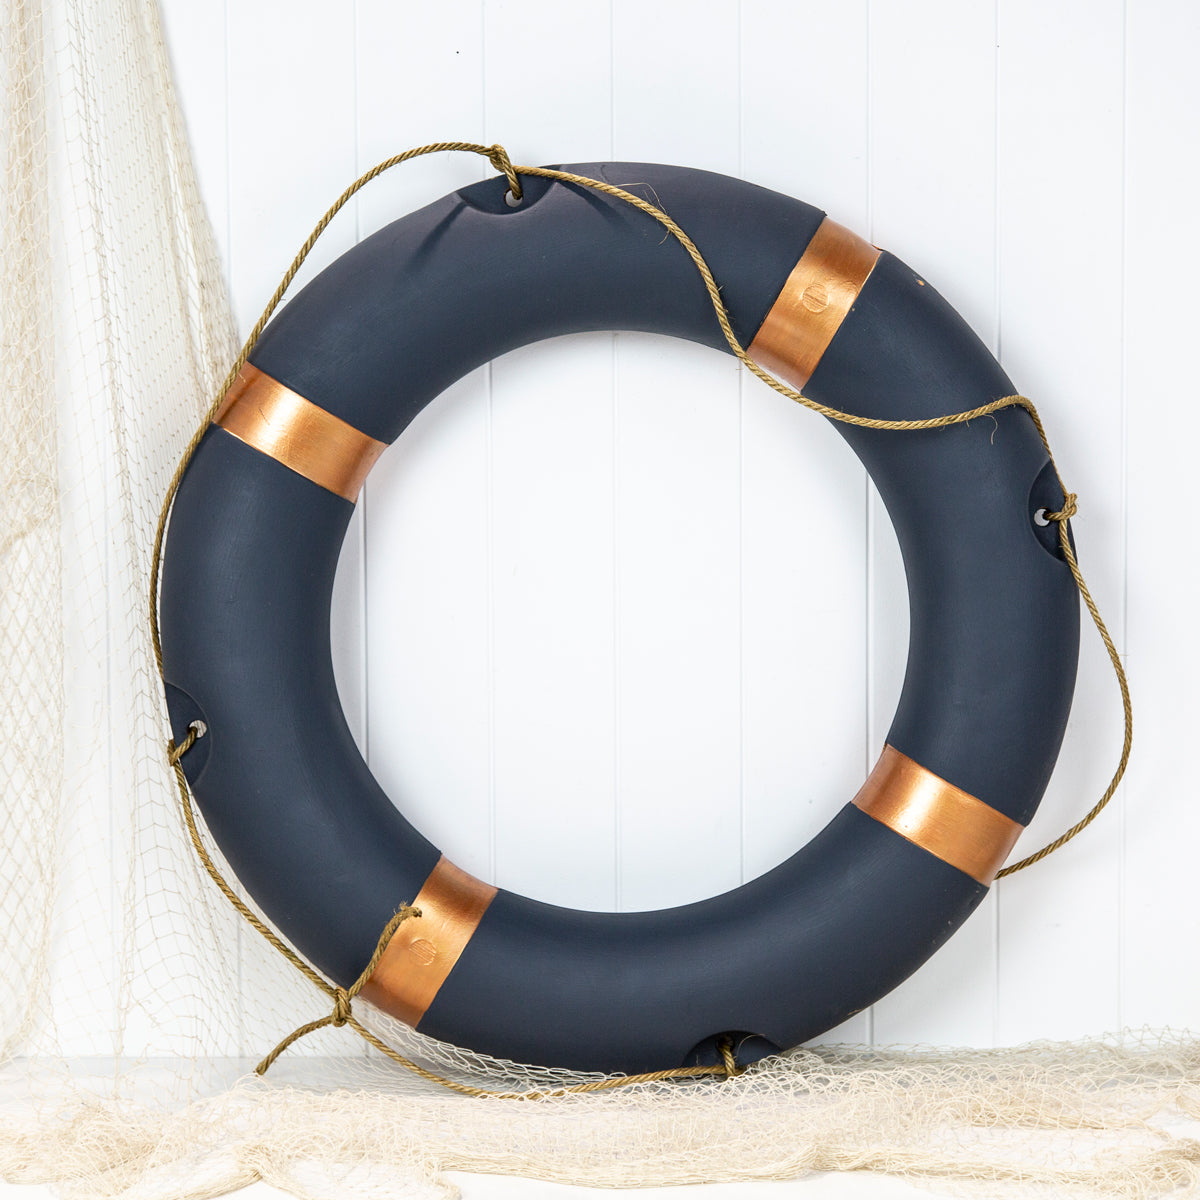 How to Make a DIY Personalized Life Preserver for Decor - Life Love Larson